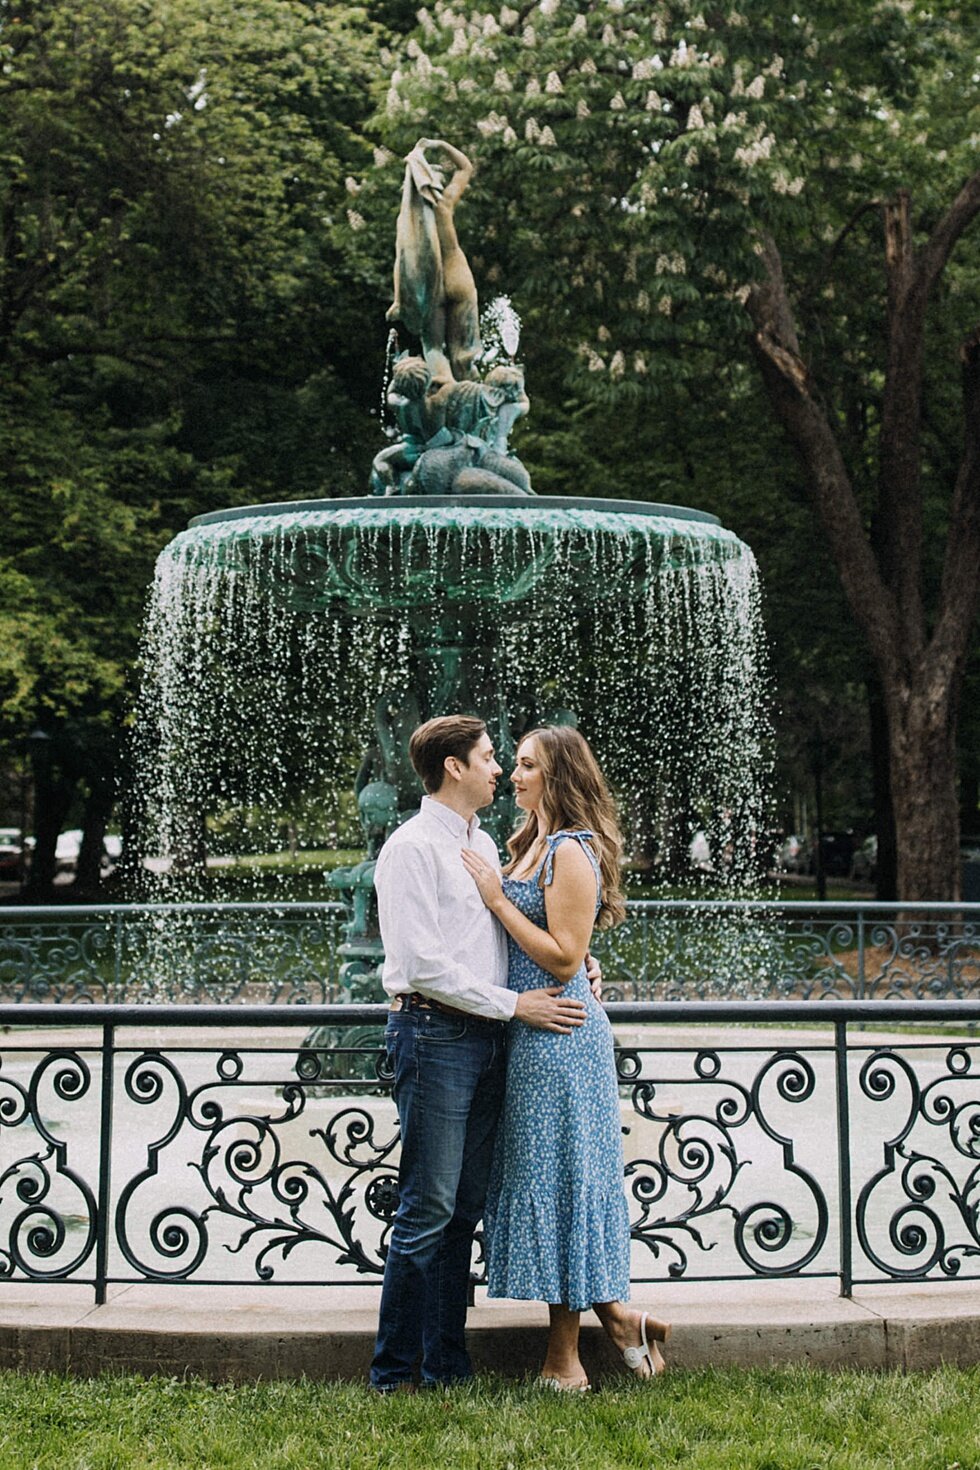  Historic Louisville Kentucky save the date photos in front of the gorgeous water fountains at St James Court and gardens. #engagementphotos #savethedatephotos #savethedates #engagementphotography  #StJamesCourt #gardenengagment   #centralpark #histo